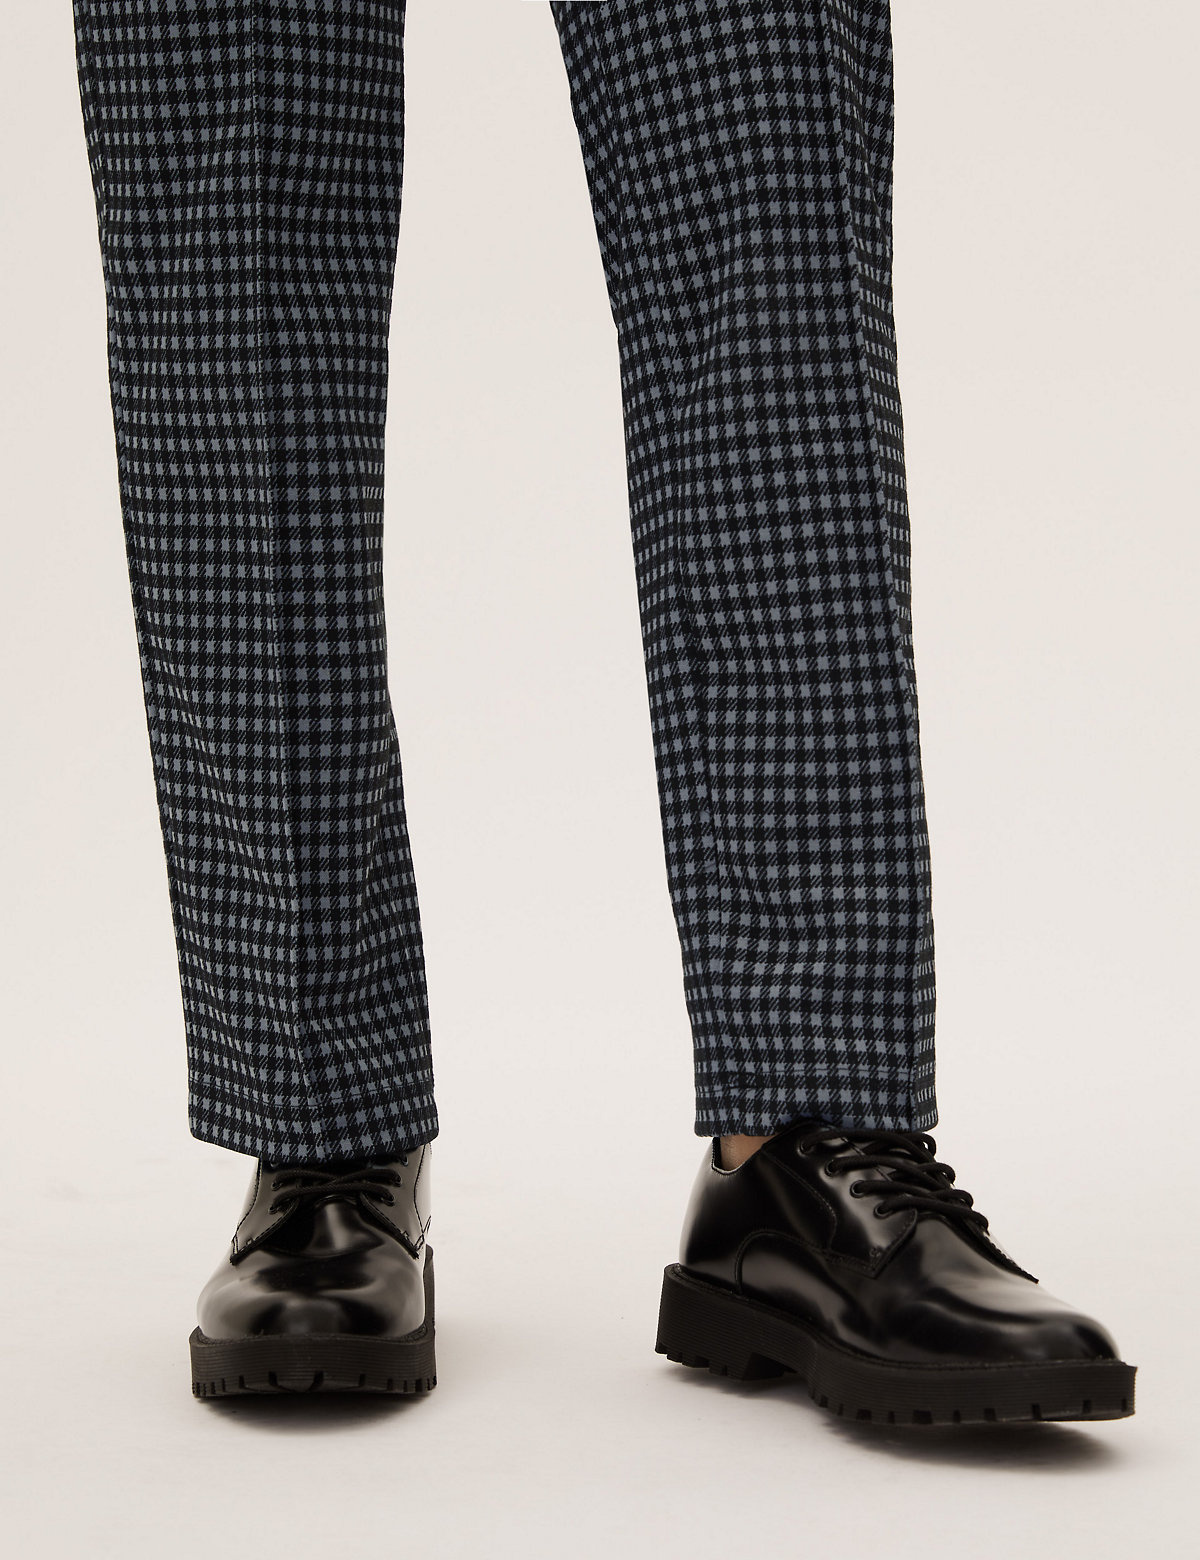 Jersey Checked Straight Leg Trousers